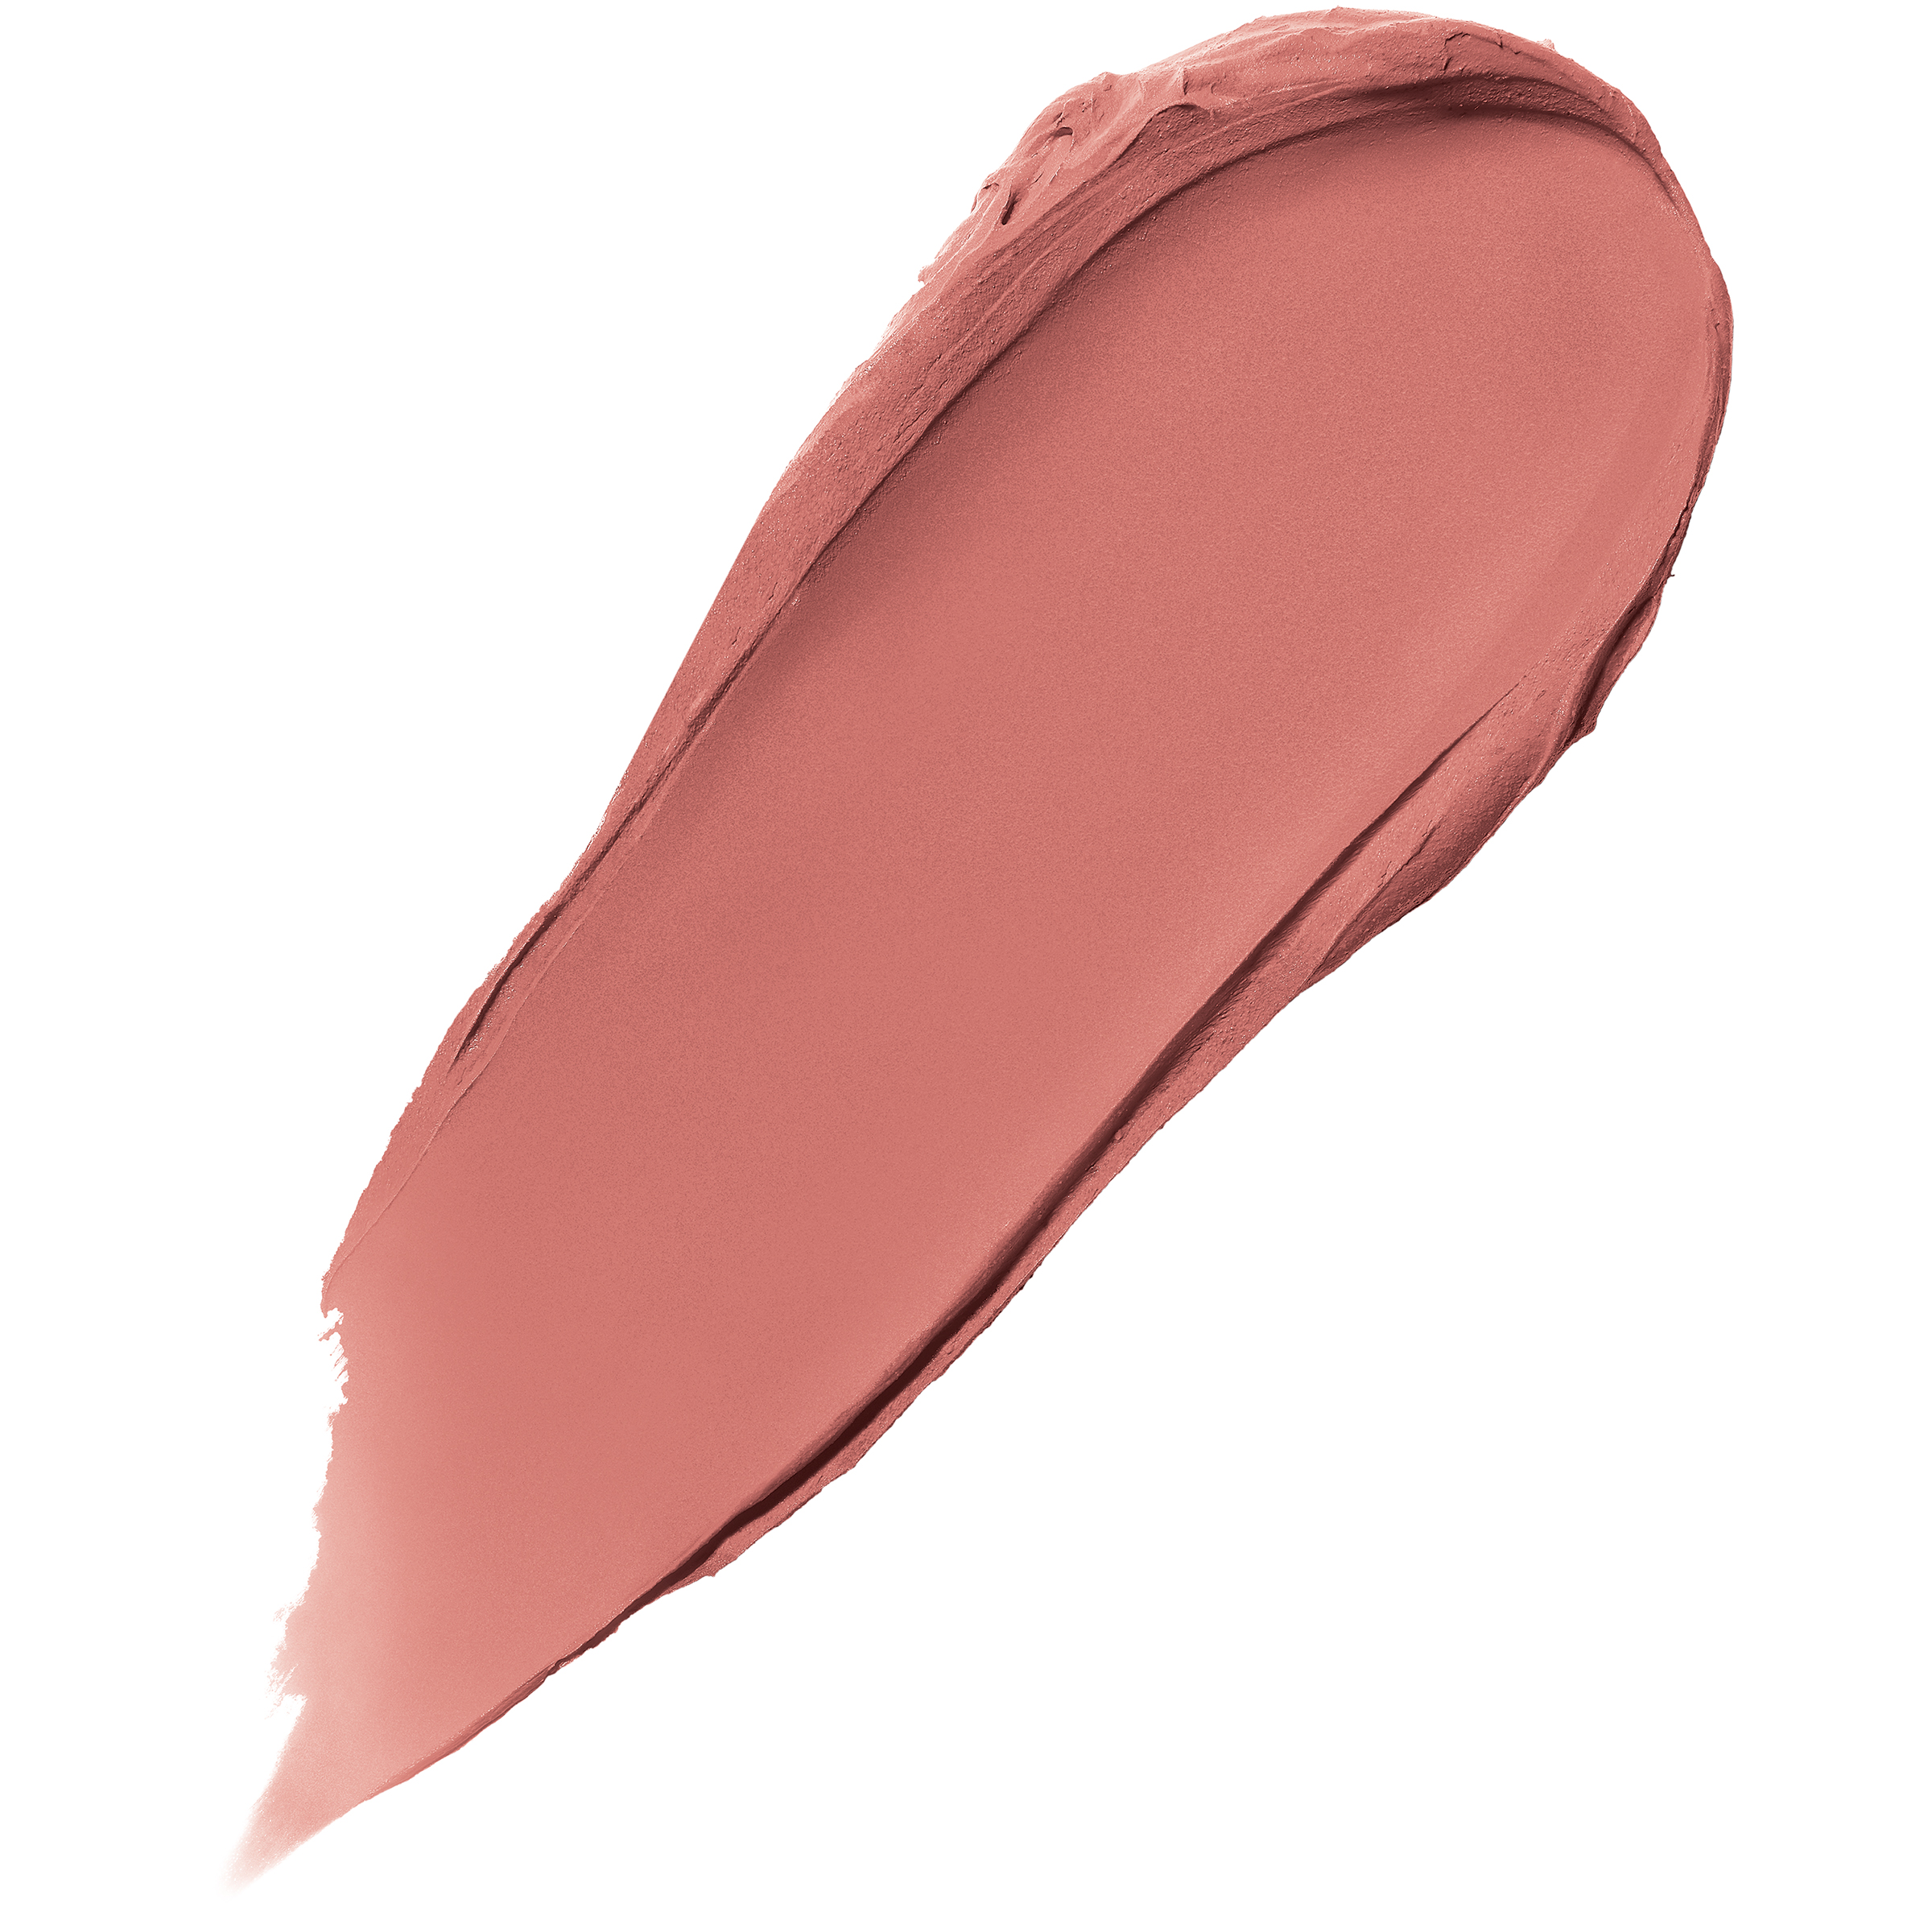 L'Oreal Paris Colour Riche Ultra Matte Highly Pigmented Nude Lipstick, Risque Roses, 0.13 oz. - image 3 of 5